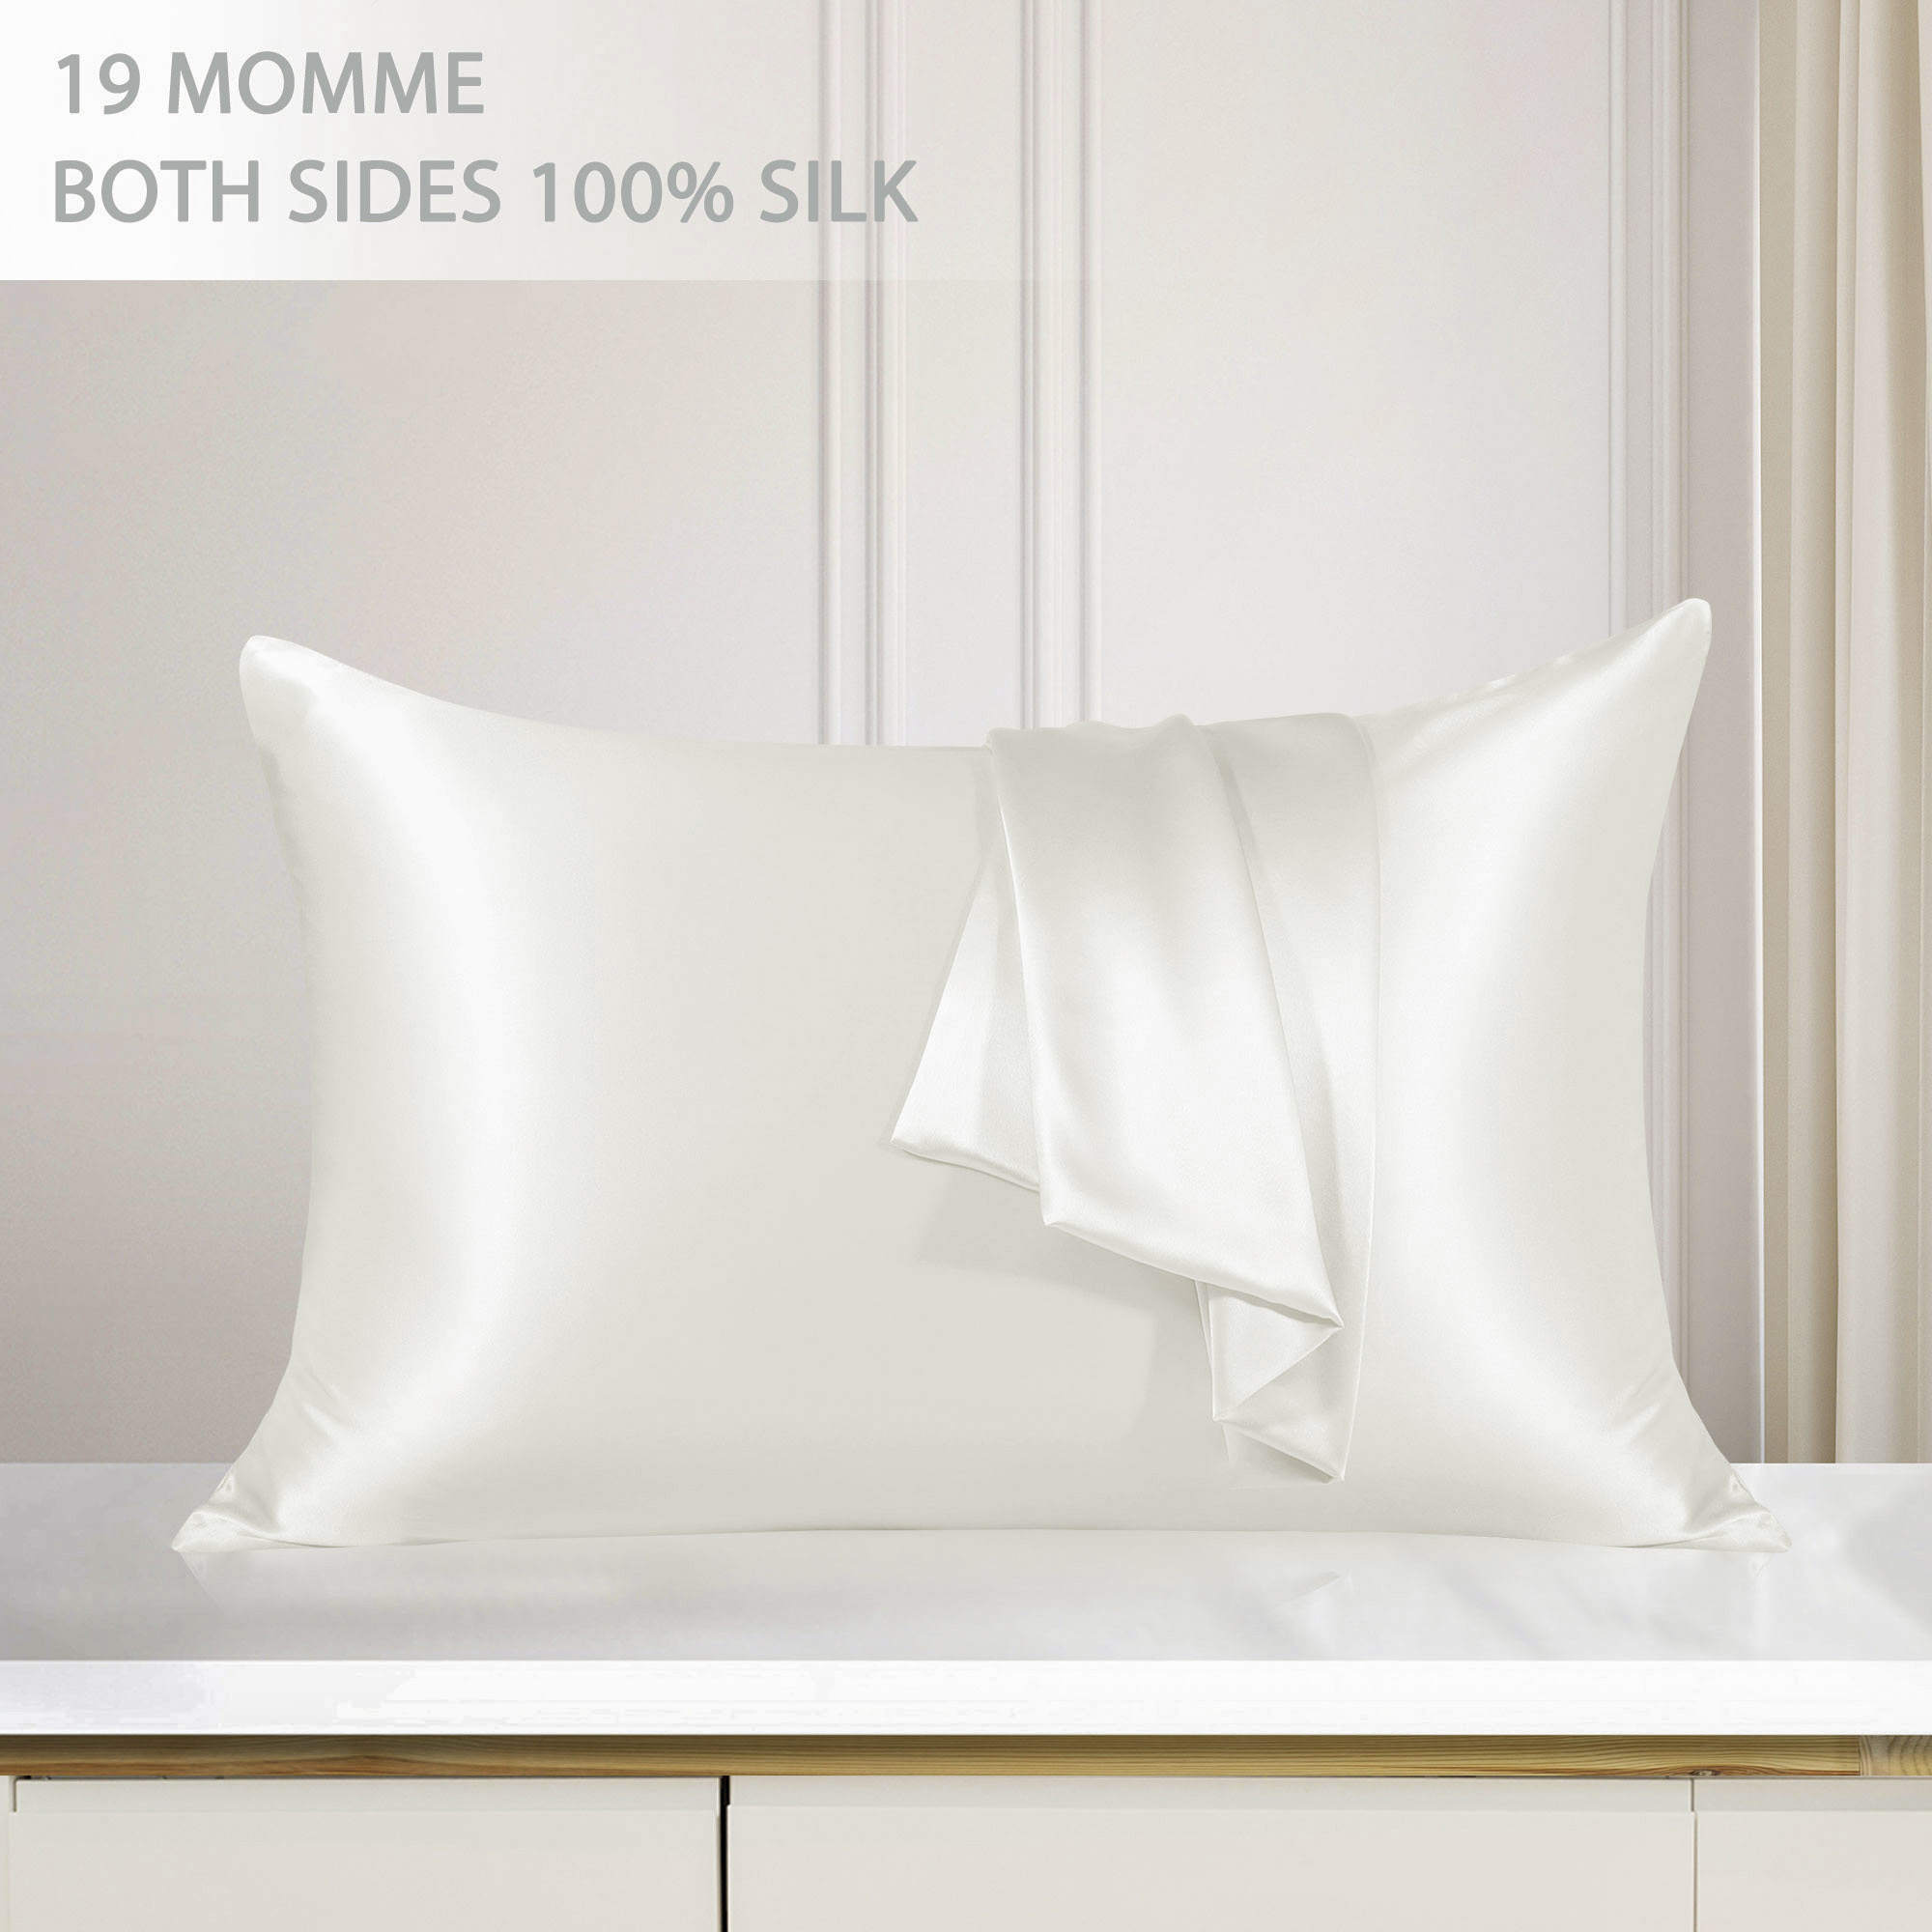 PiccoCasa 1Pc 19 Momme Silk Pillowcase with Hidden Zipper Pearl White King(20"x36") - image 1 of 6